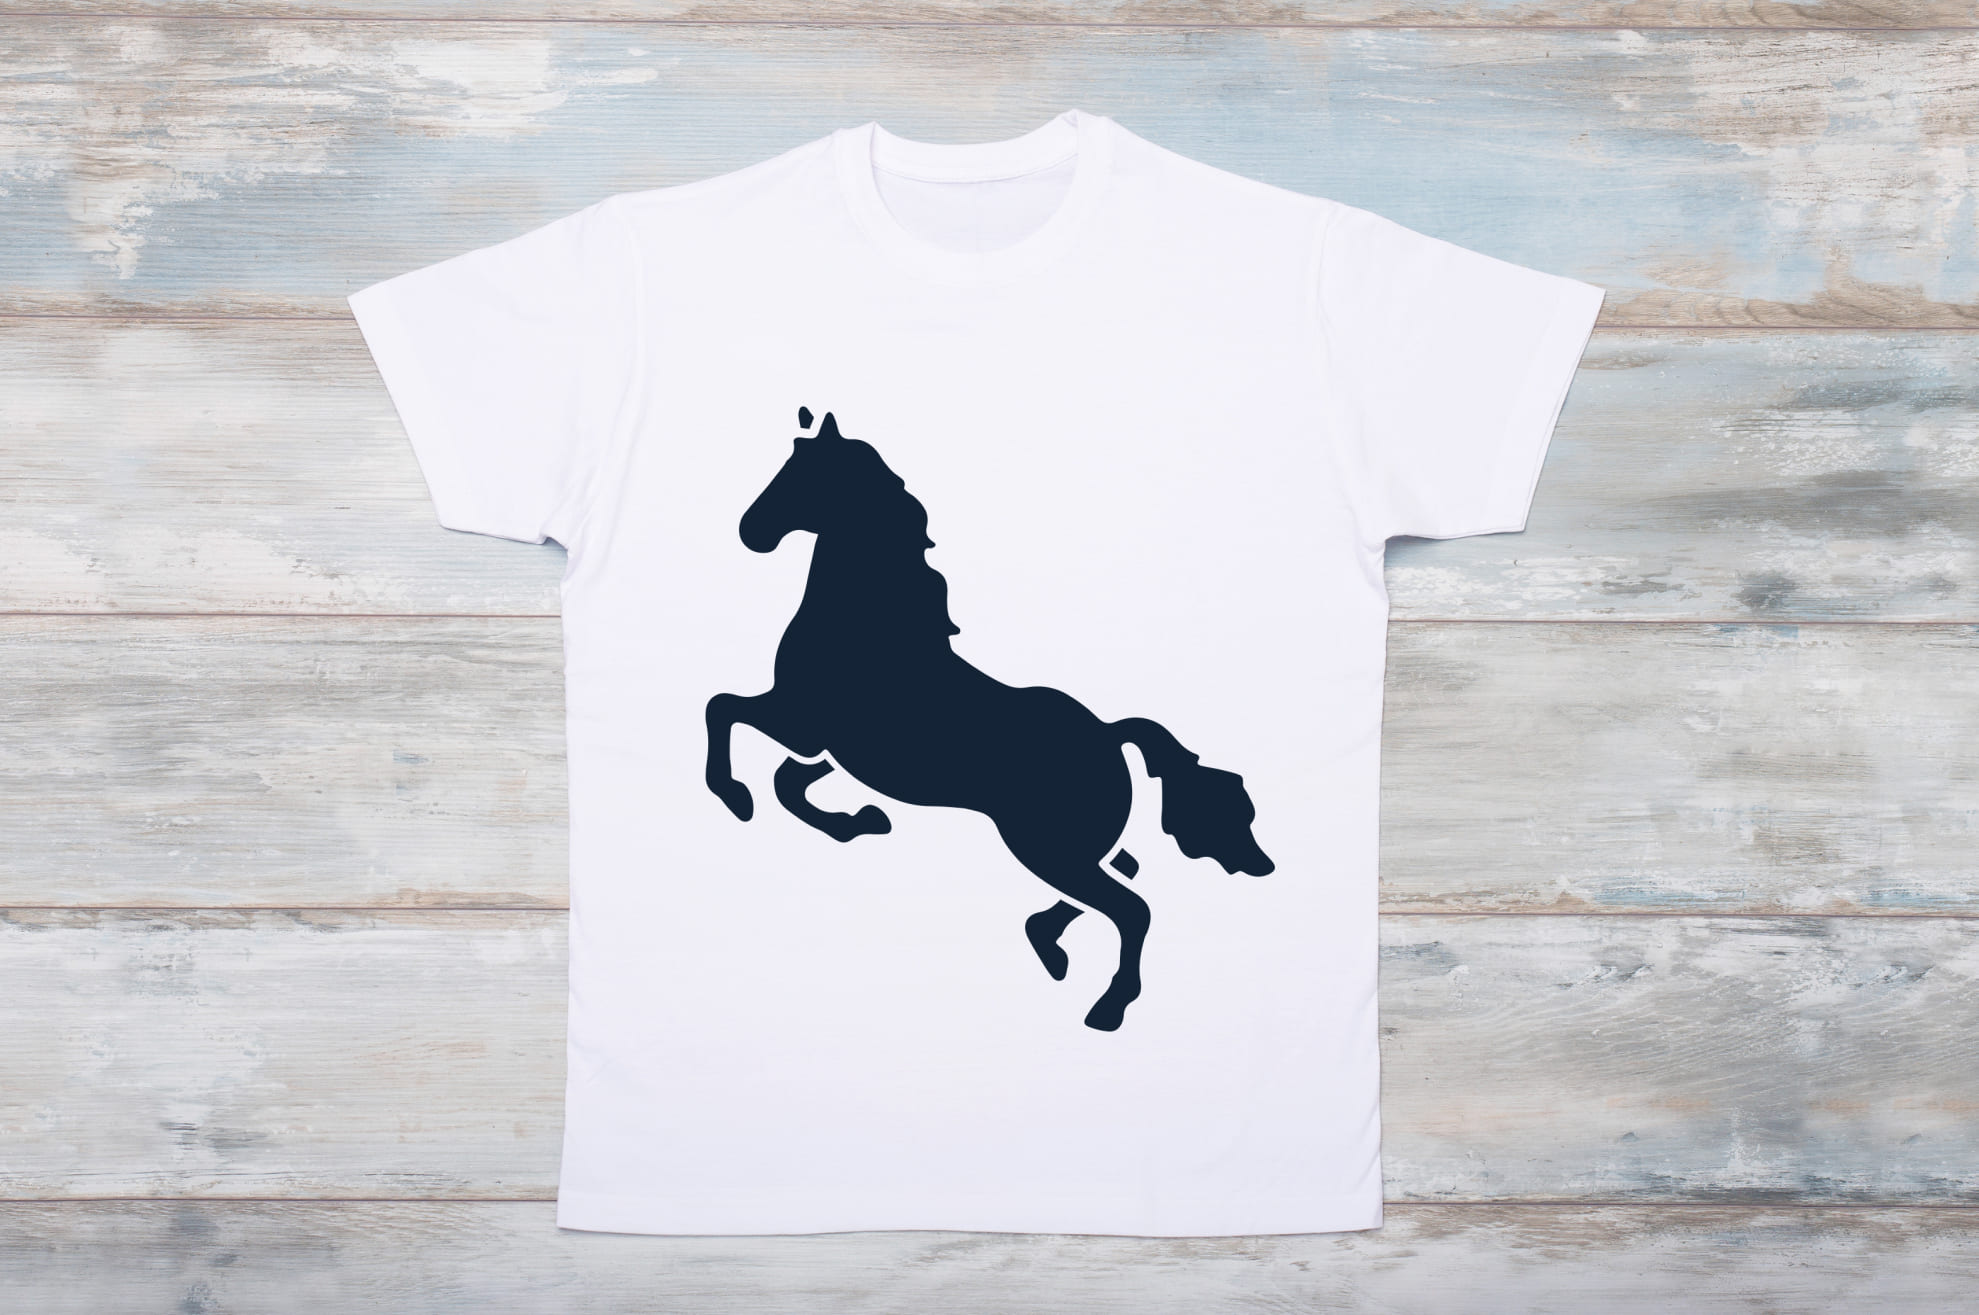 White t-shirt with a black silhouette of an energetic horse on the wooden background.